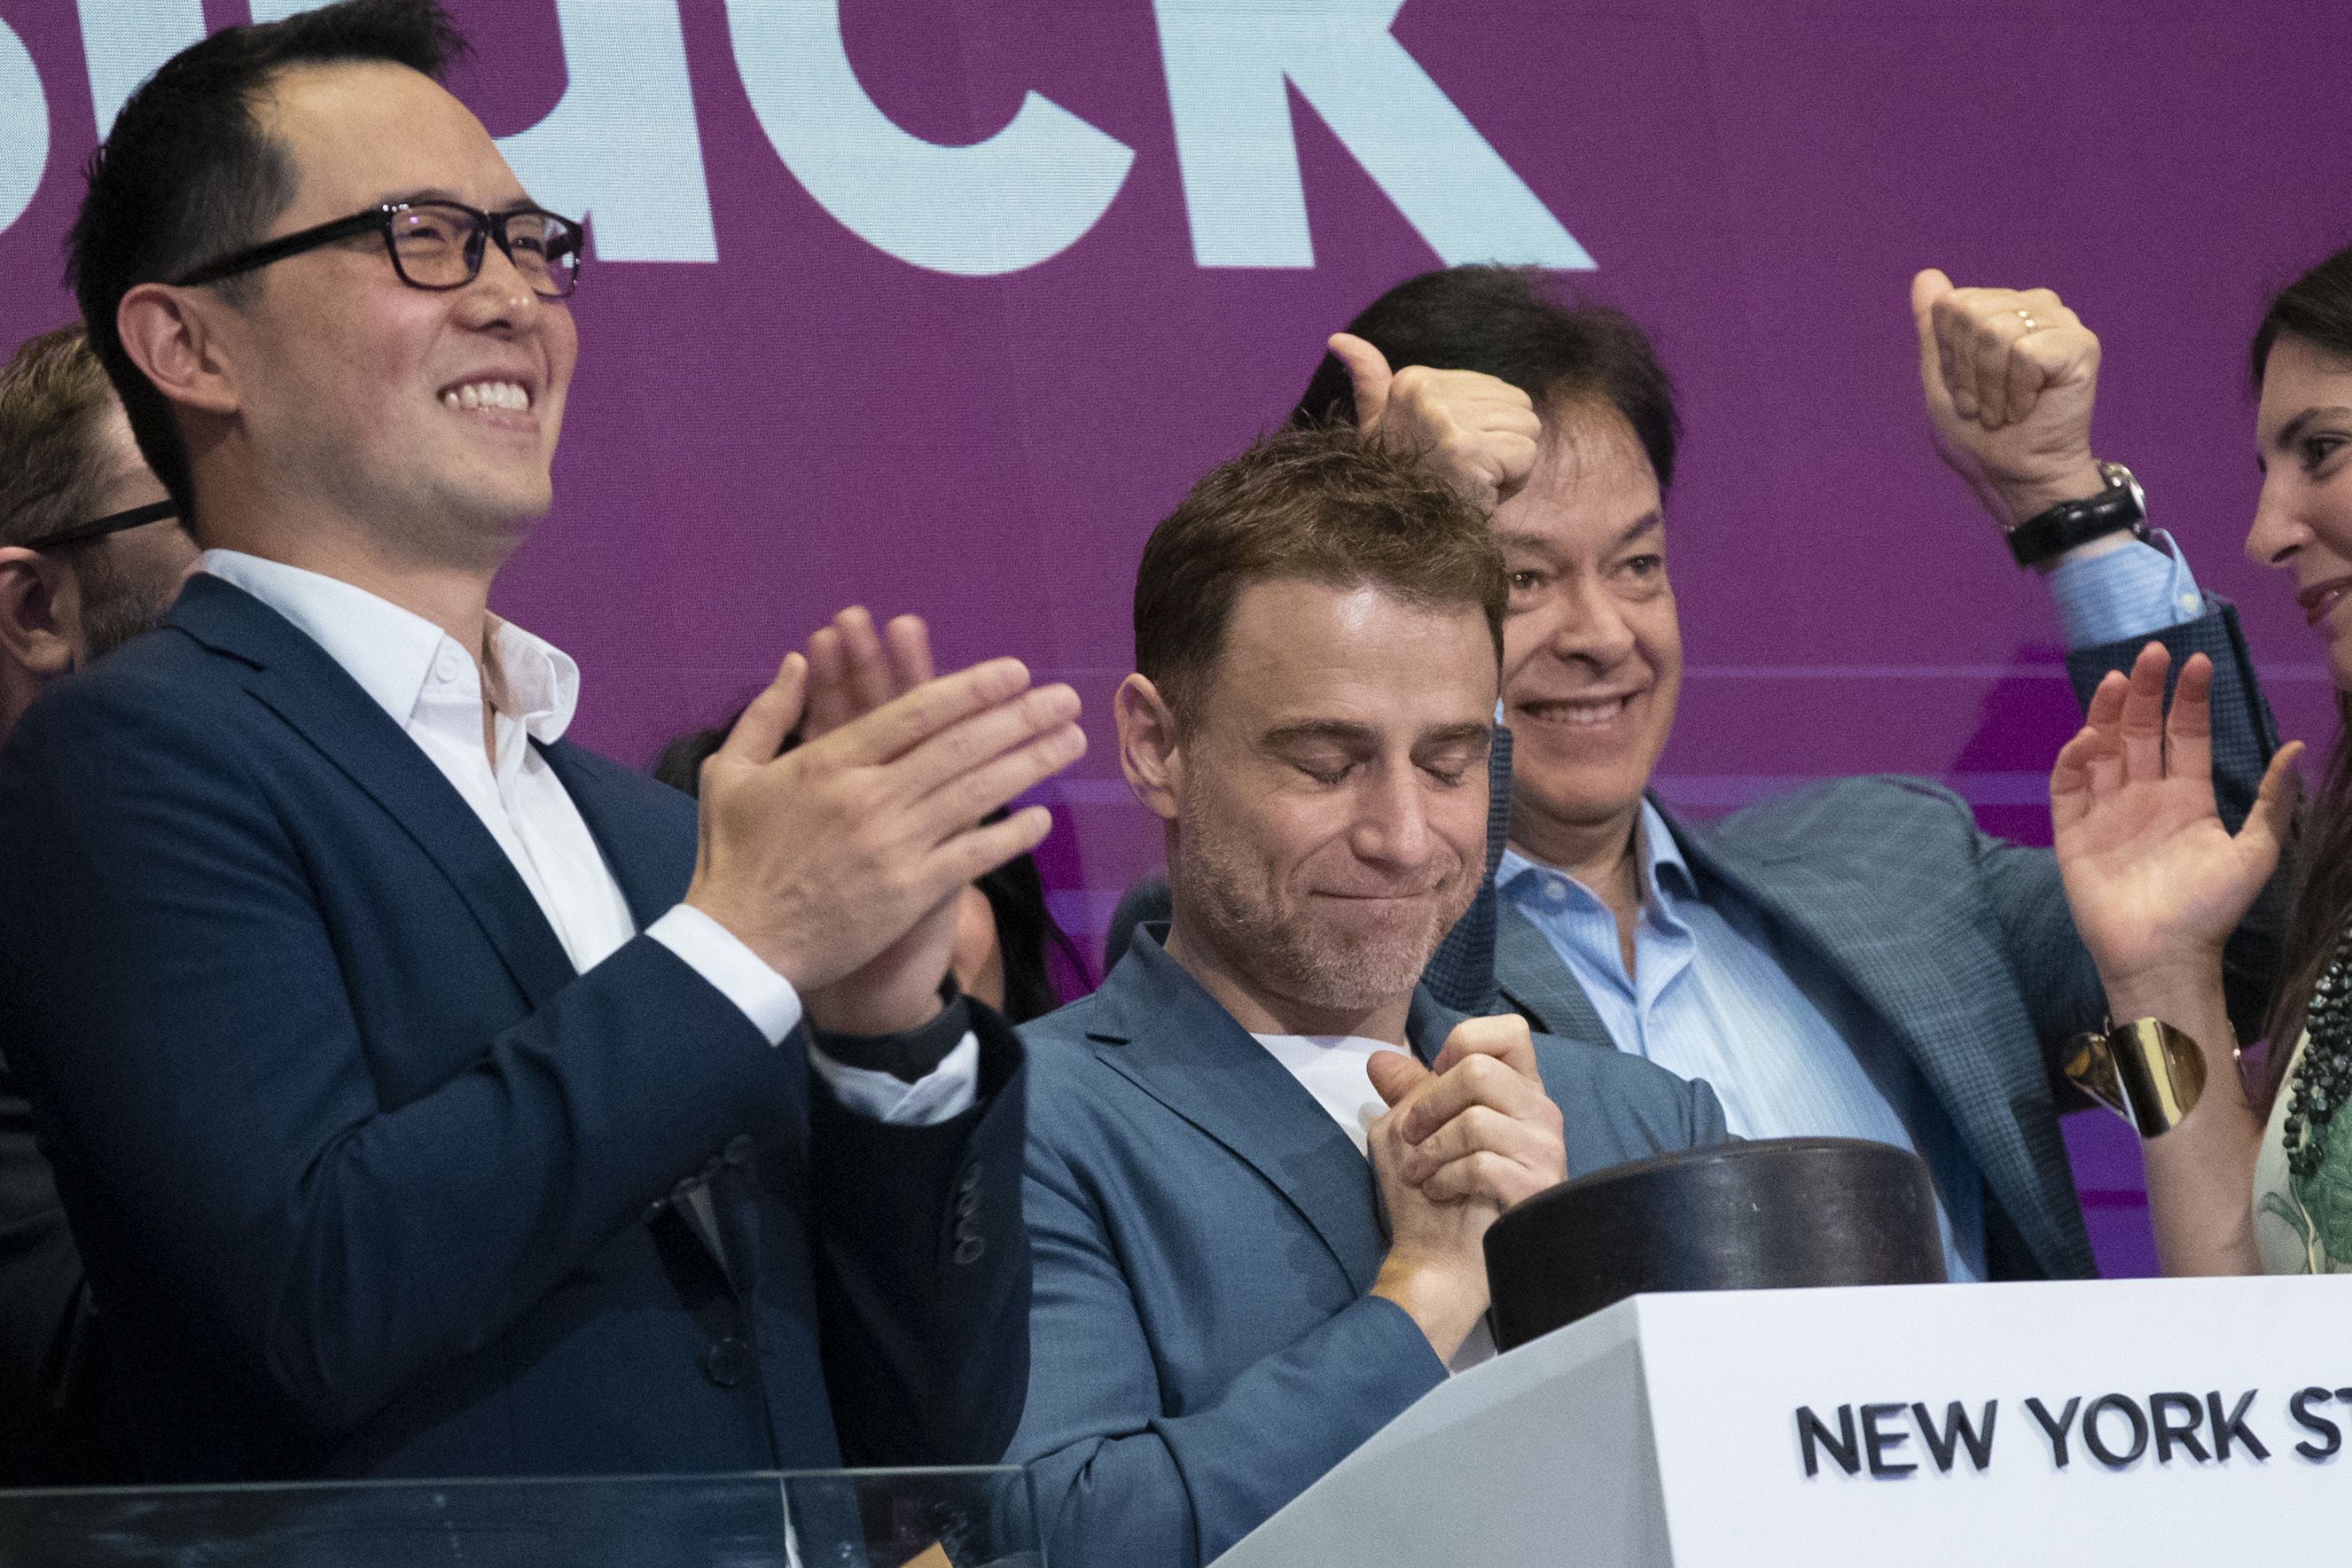 Stewart Butterfield, chief executive officer of Slack Technologies, Inc., speaks during an interview outside of the New York Stock Exchange (NYSE) during the company's initial public offering (IPO) in New York, U.S., on Thursday, June 20, 2019.